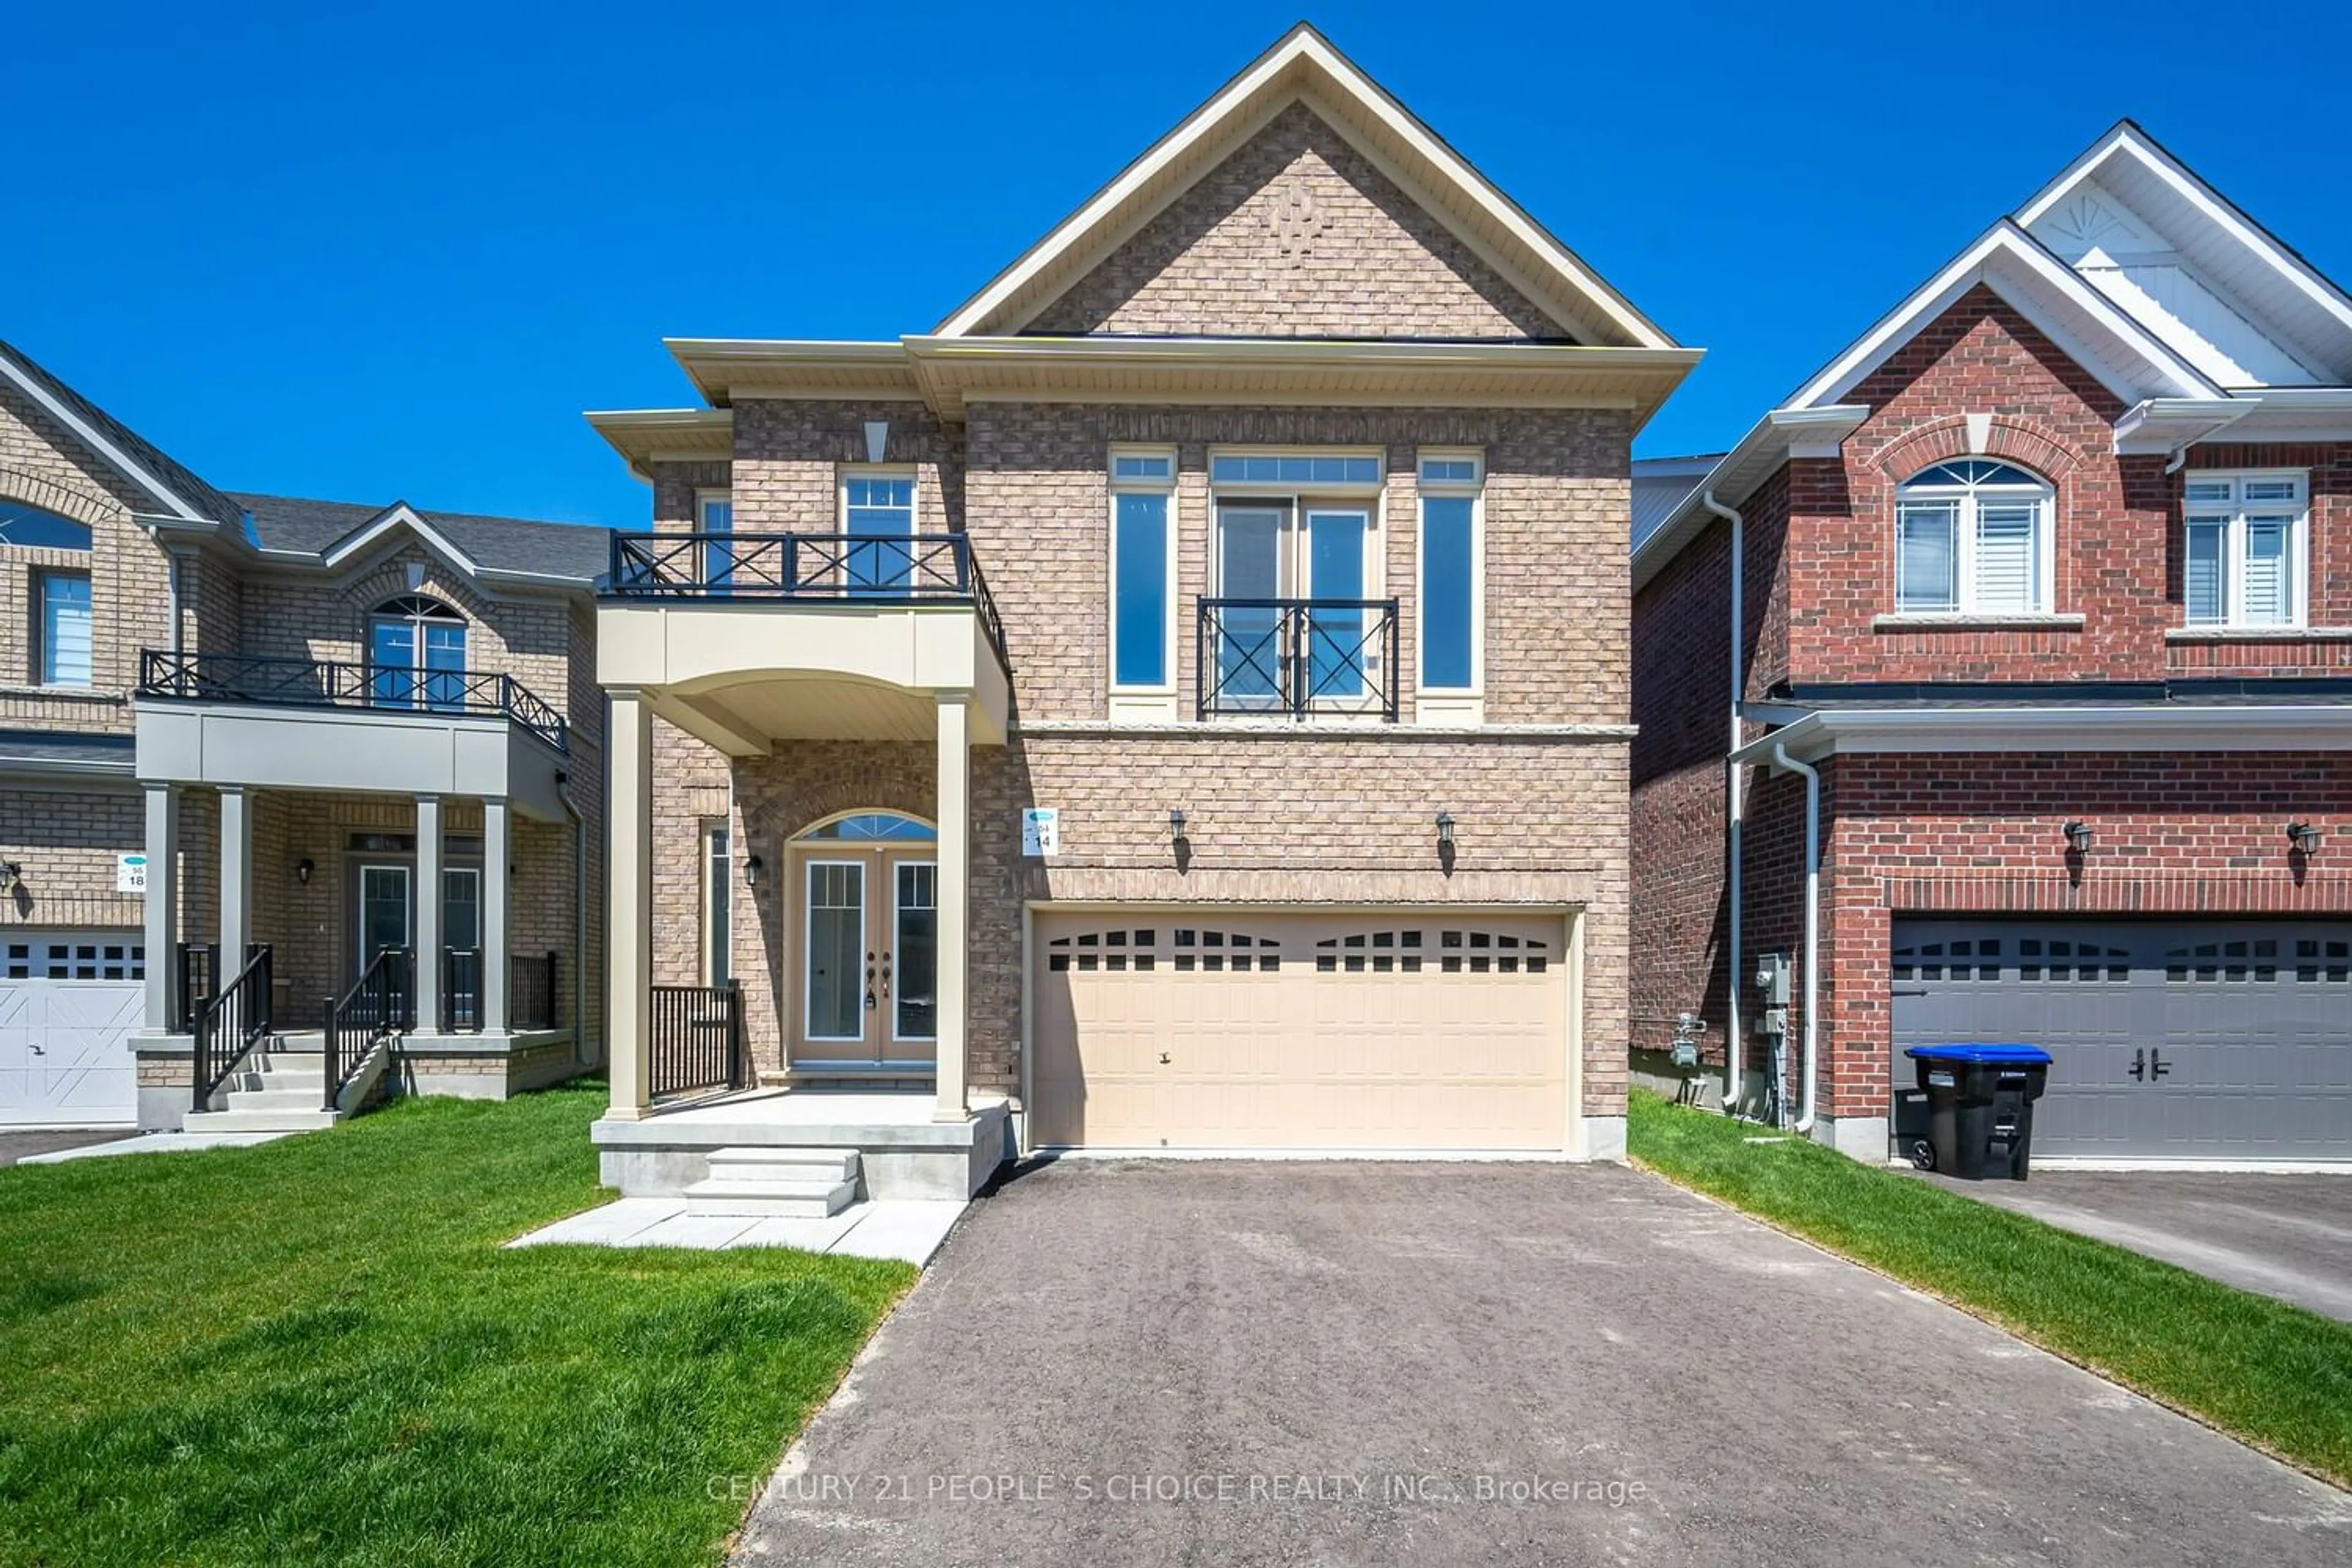 Home with brick exterior material for 14 Mac Campbell Way, Bradford West Gwillimbury Ontario L3Z 4M7